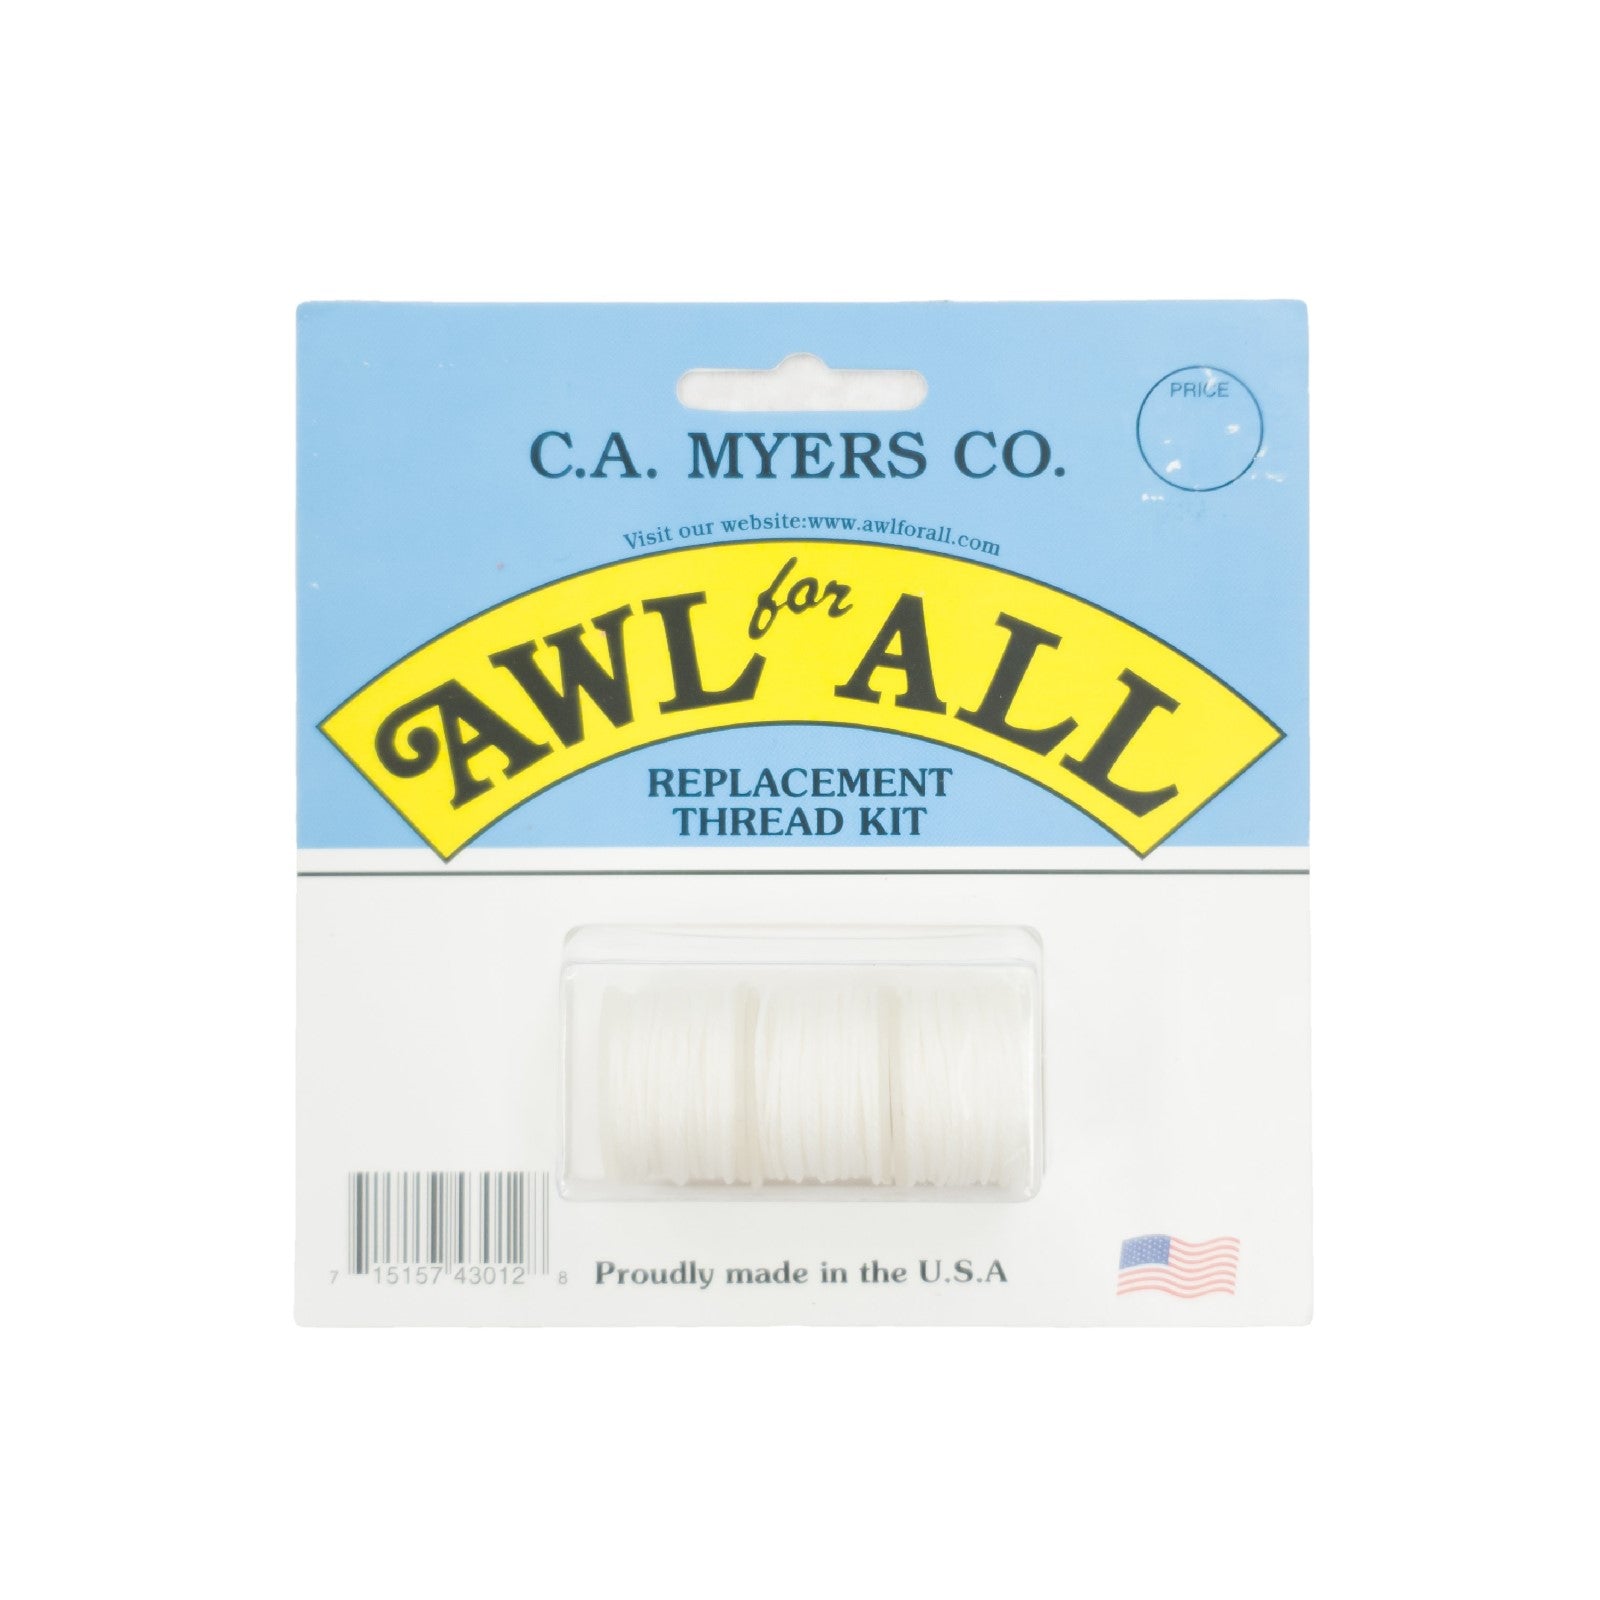 Sewing Awl Stitching Tool, Needles & Thread, Thread 3 Pack / White Thread | The Leather Guy